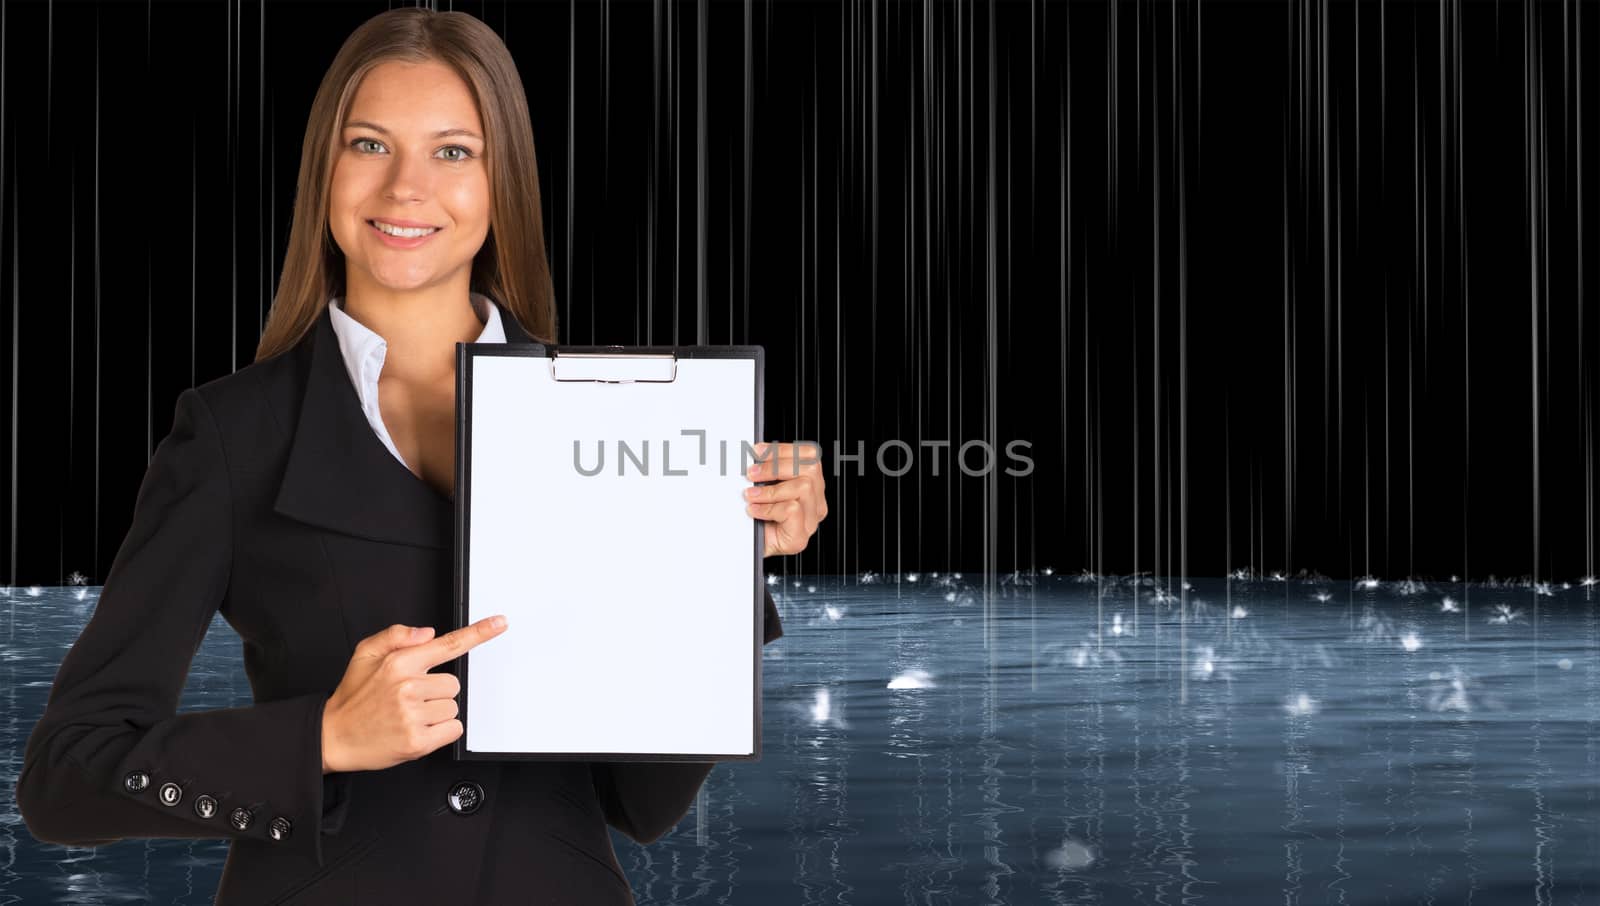 Businesswoman holding paper holder. Rain and surface waters as backdrop